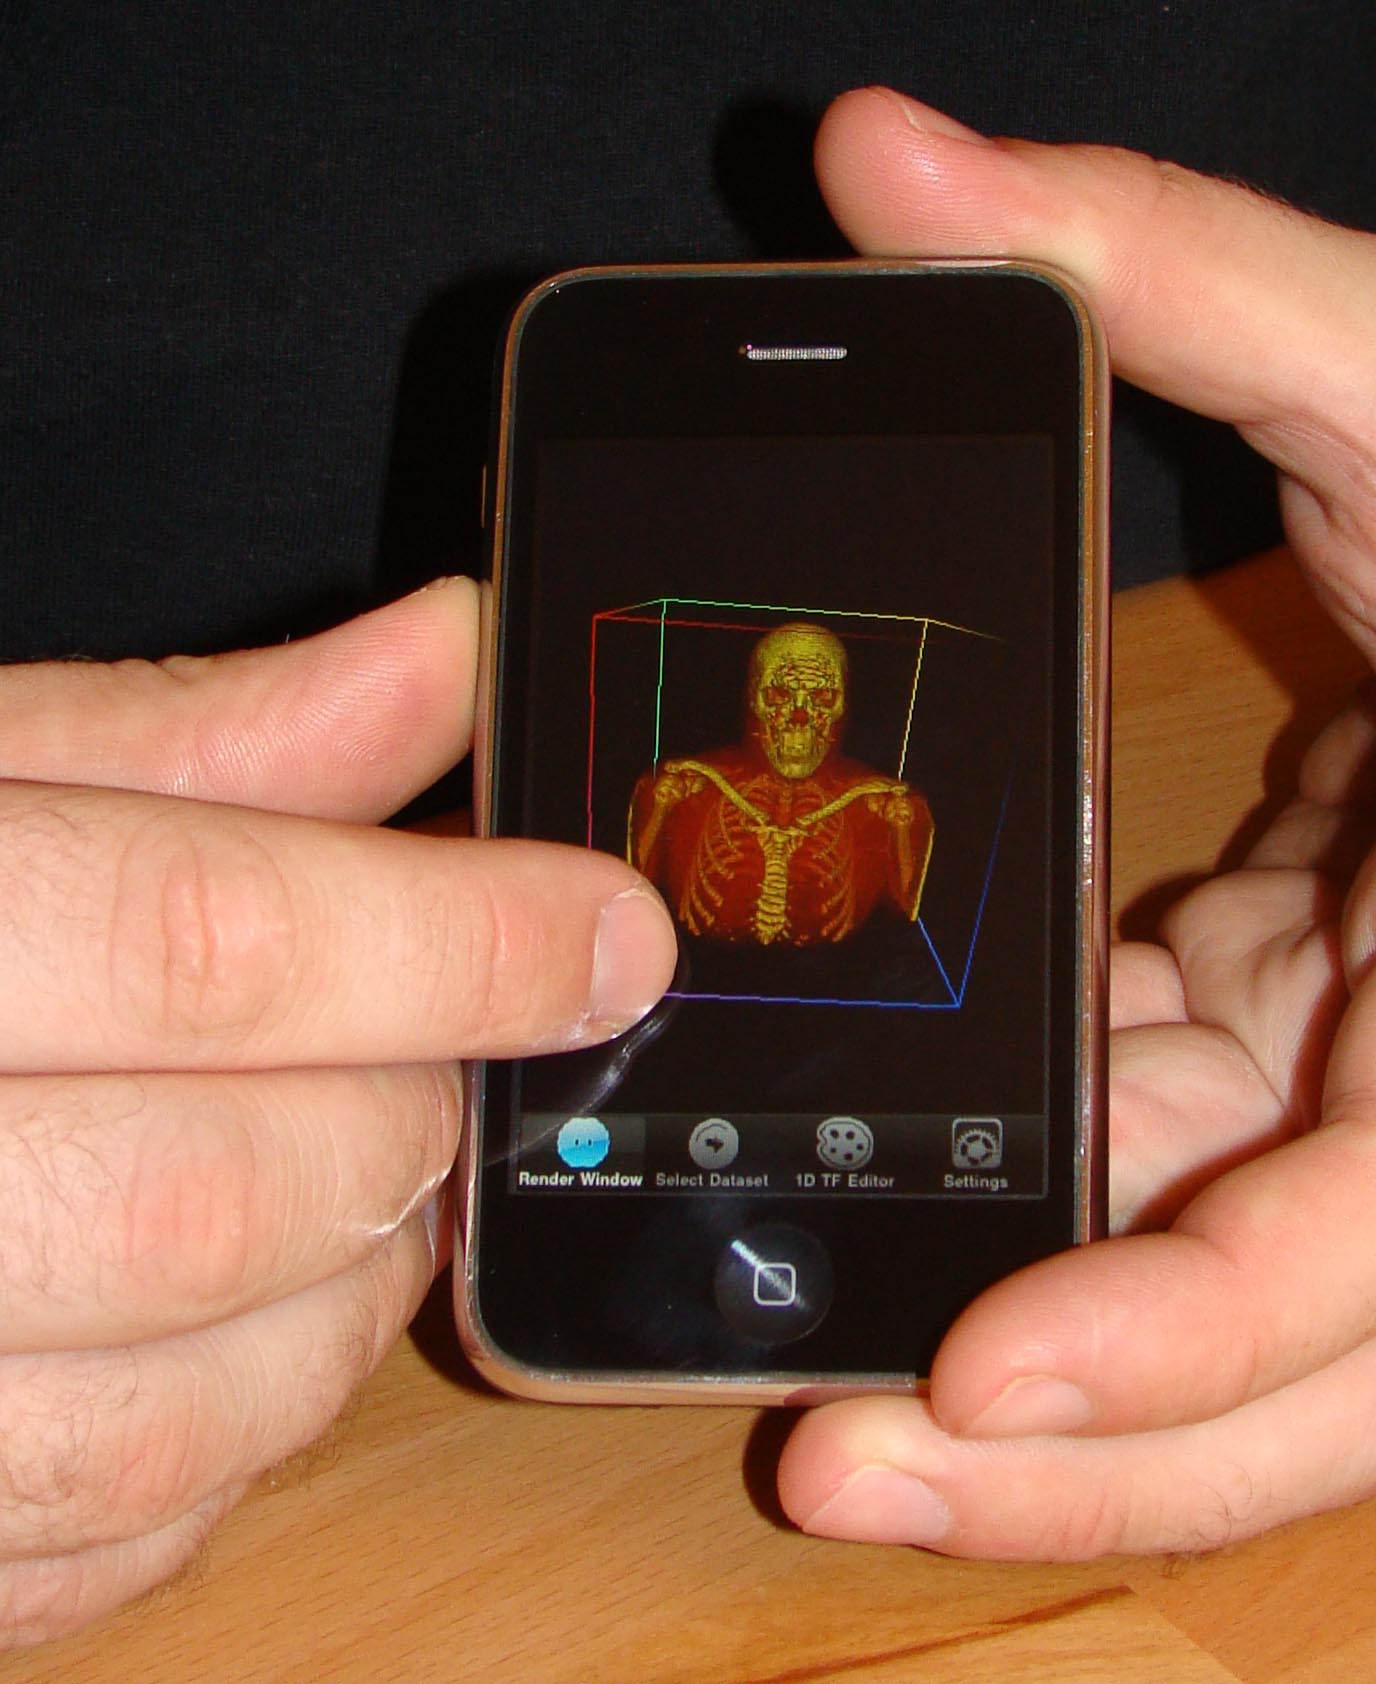 A three-dimensional visualization of a human torso -- constructed from CT scan X-rays -- is displayed on an iPhone using an "app" or application named ImageVis3D Mobile, which was developed by researchers at the University of Utah's Scientific Computing and Imaging Institute.